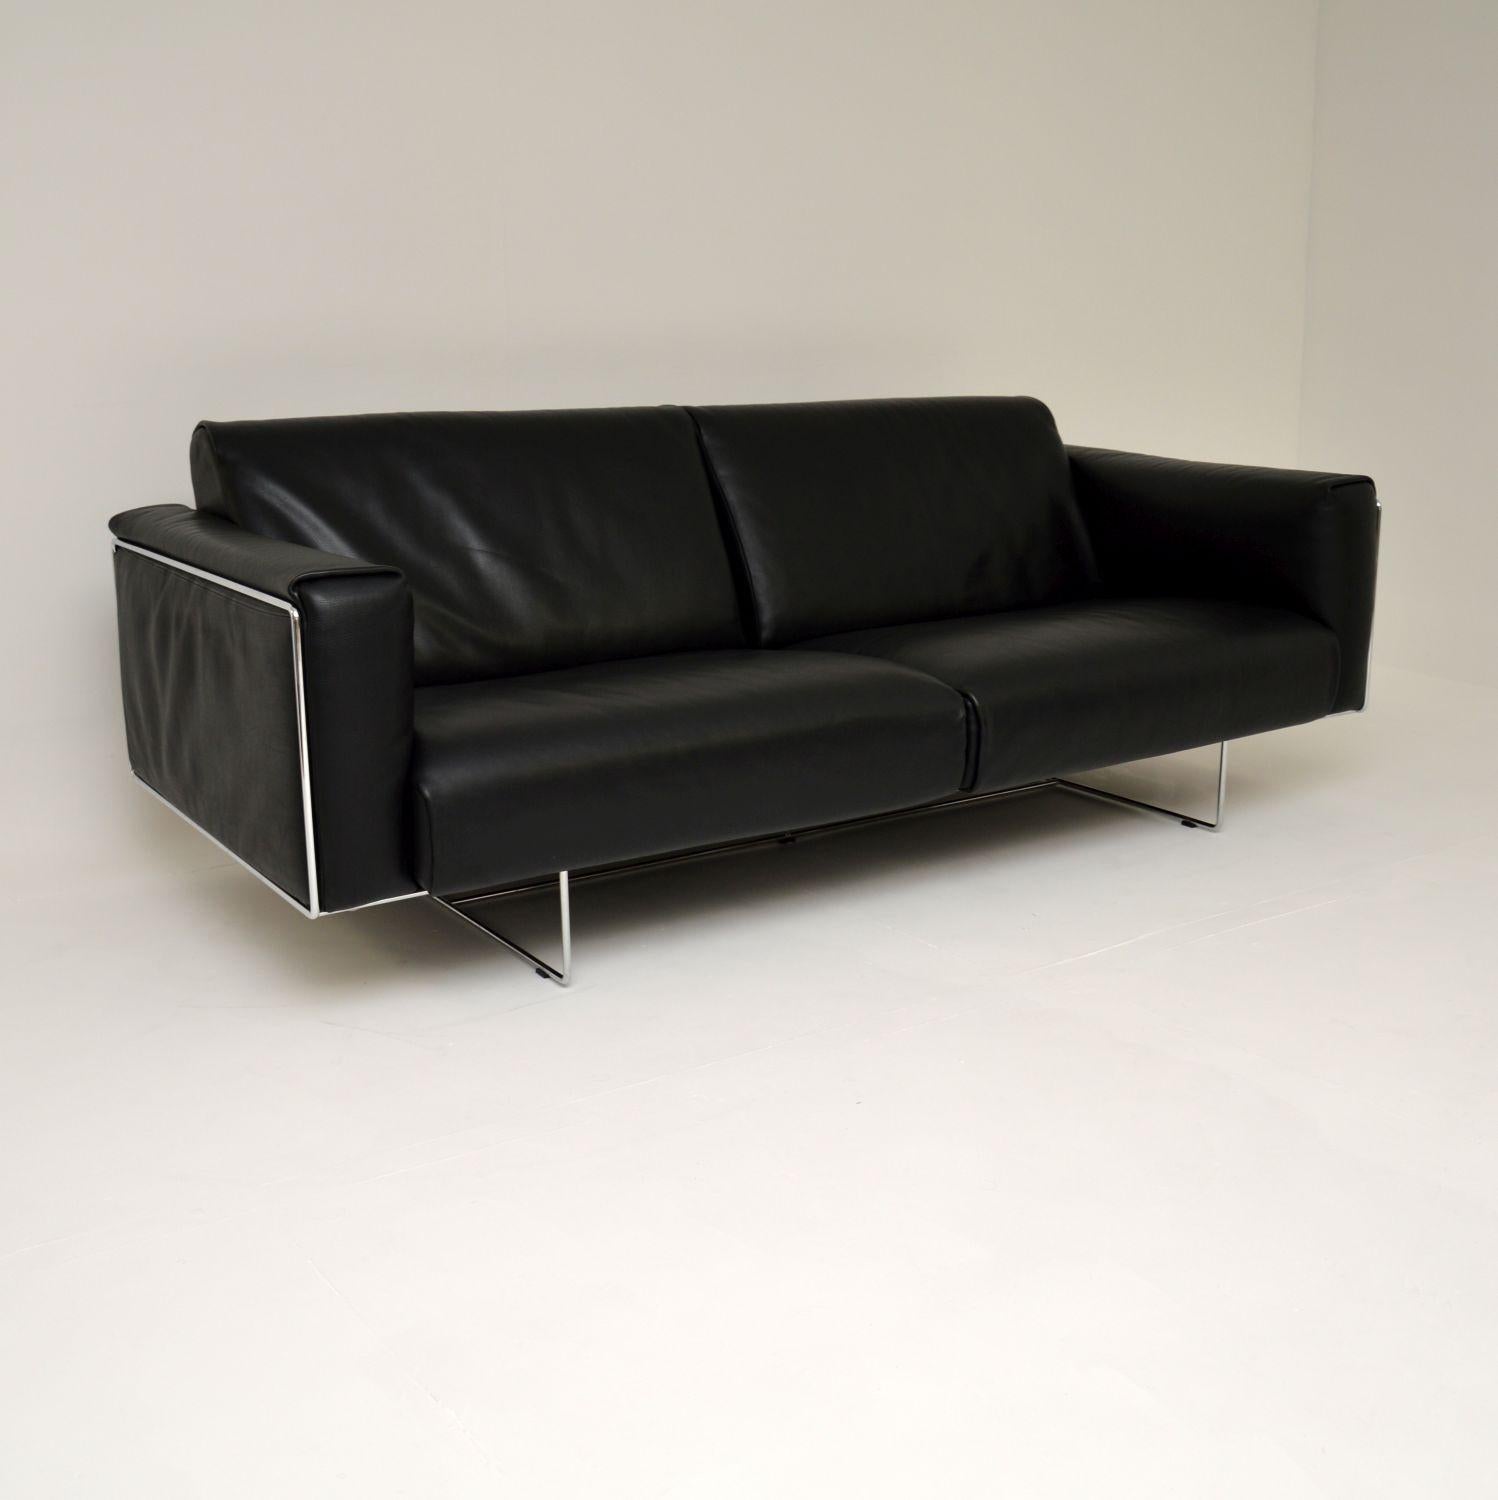 A superb and very stylish designer leather sofa by Matteo Grassi. This dates from the early 21st century, it was made in Italy.

The quality is outstanding and this is extremely comfortable. The thick black leather upholstery is super soft and has